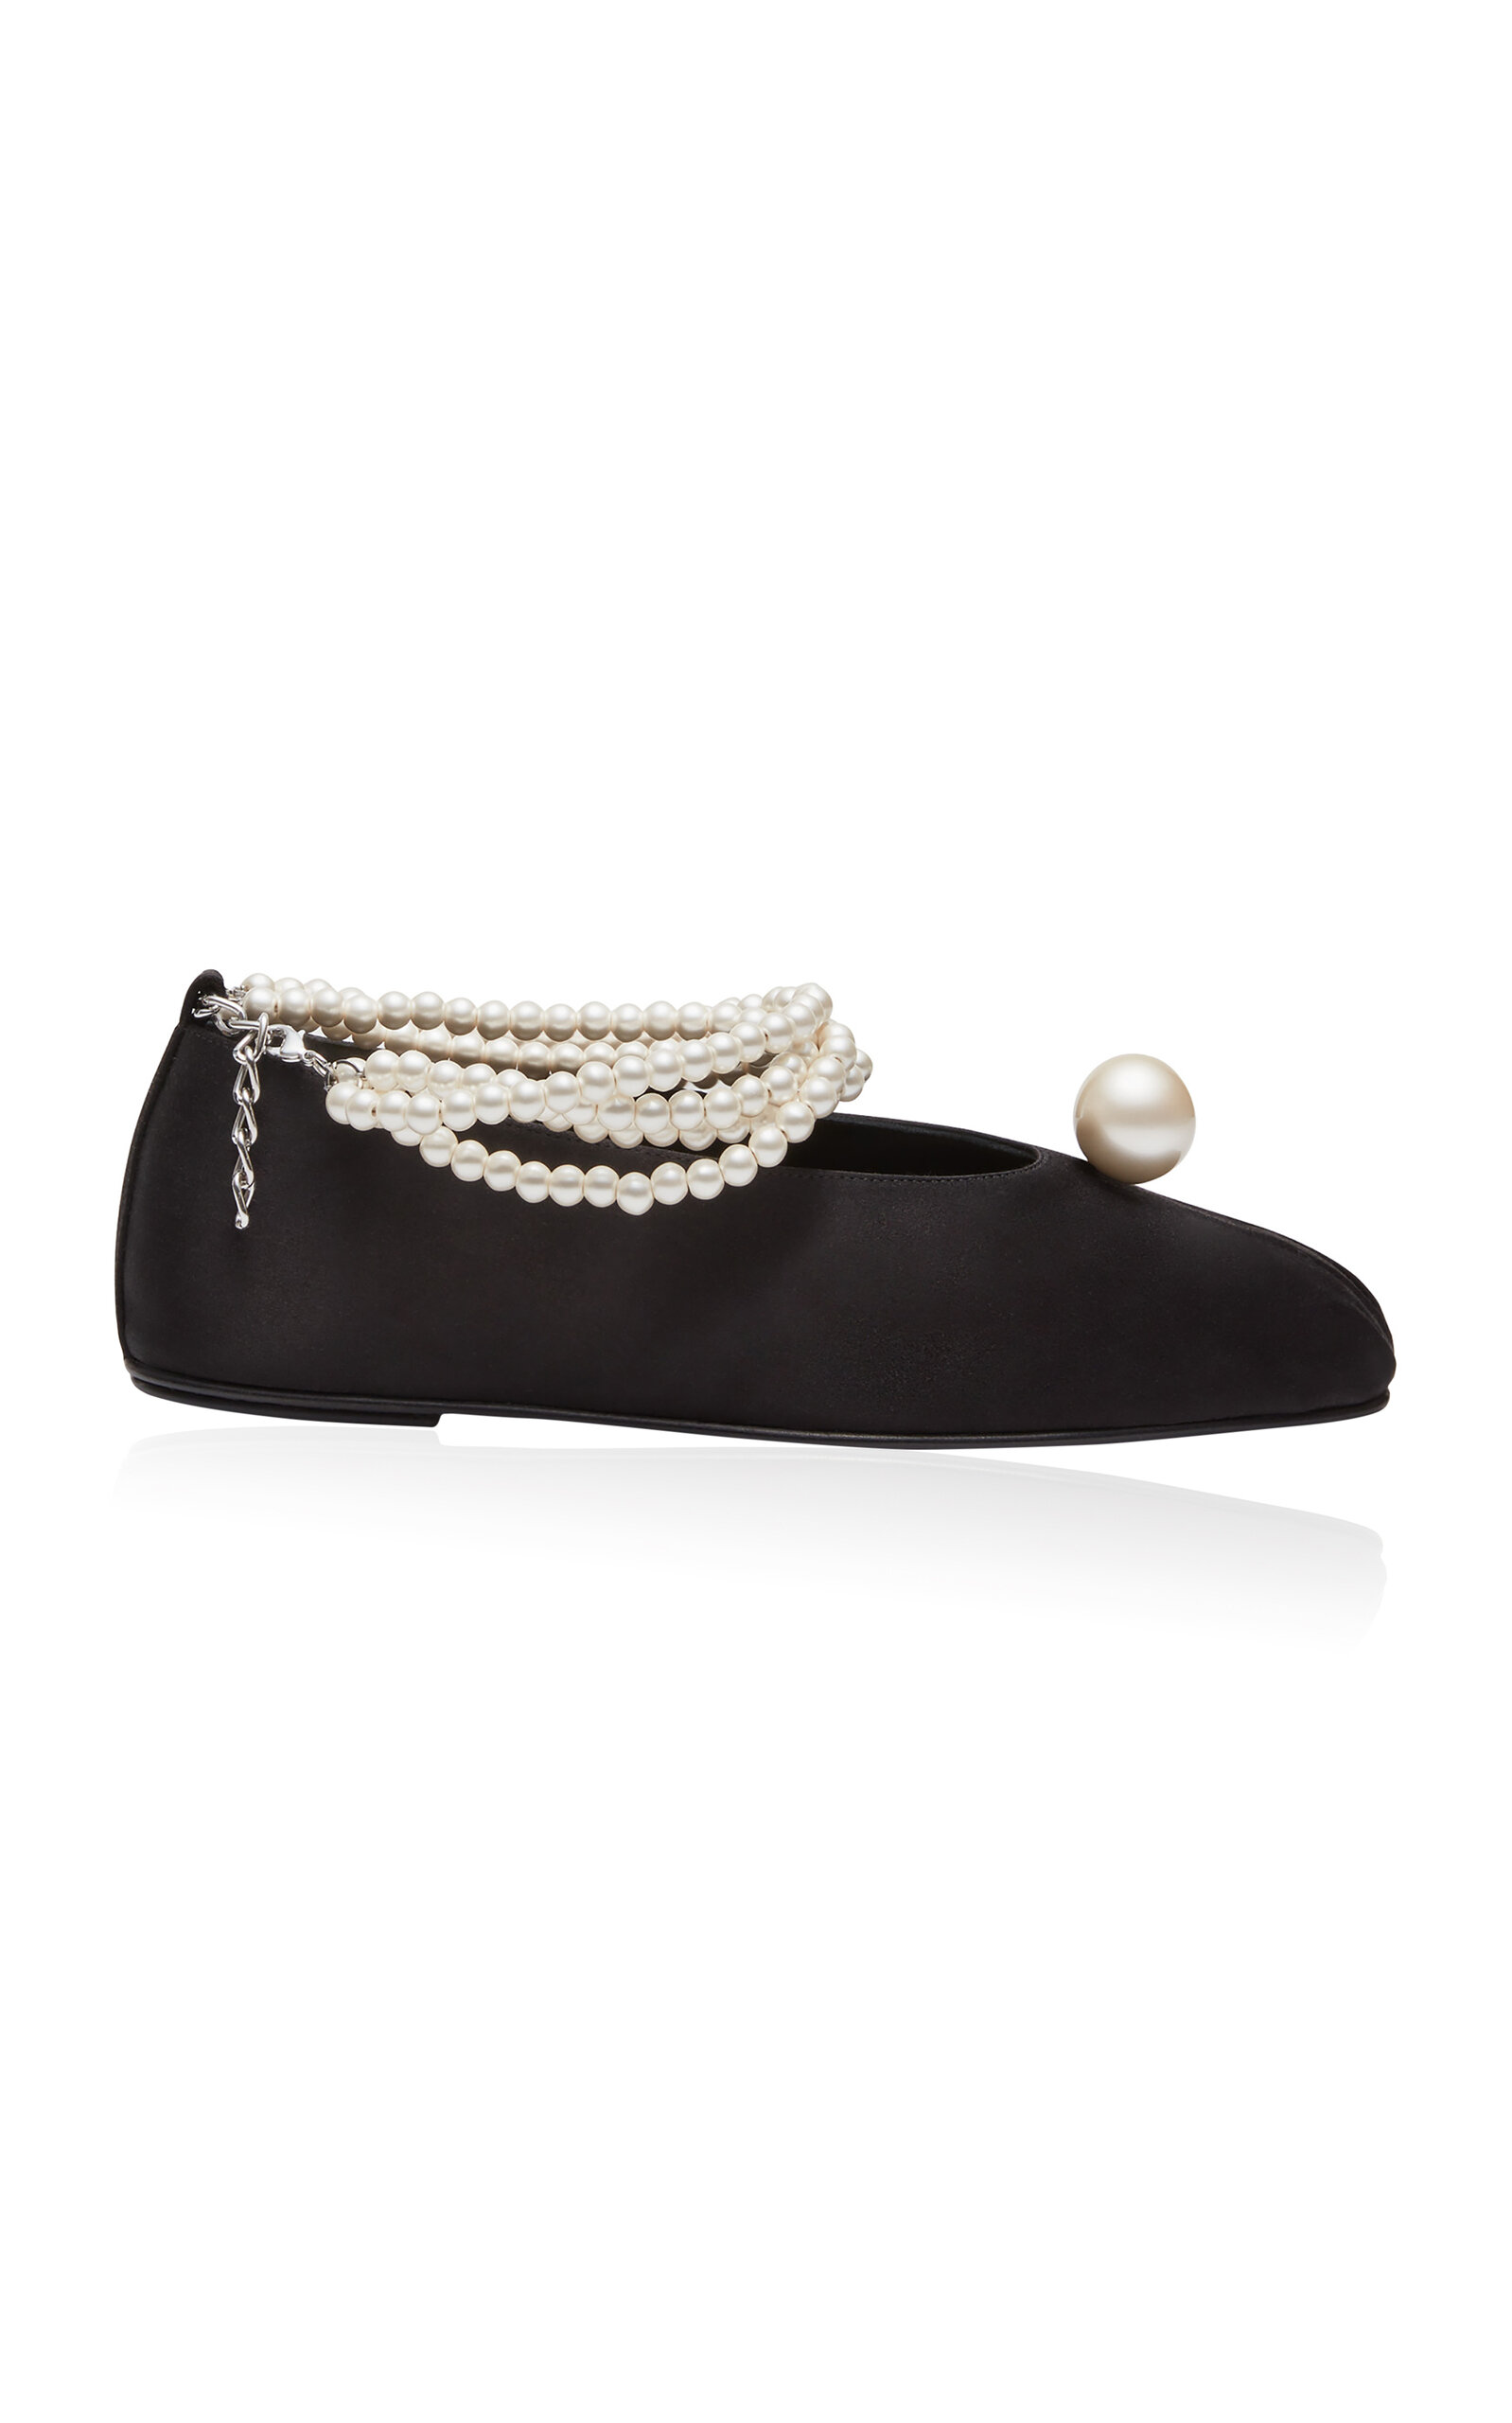 Satin and Pearl-Embellished Ballet Flats